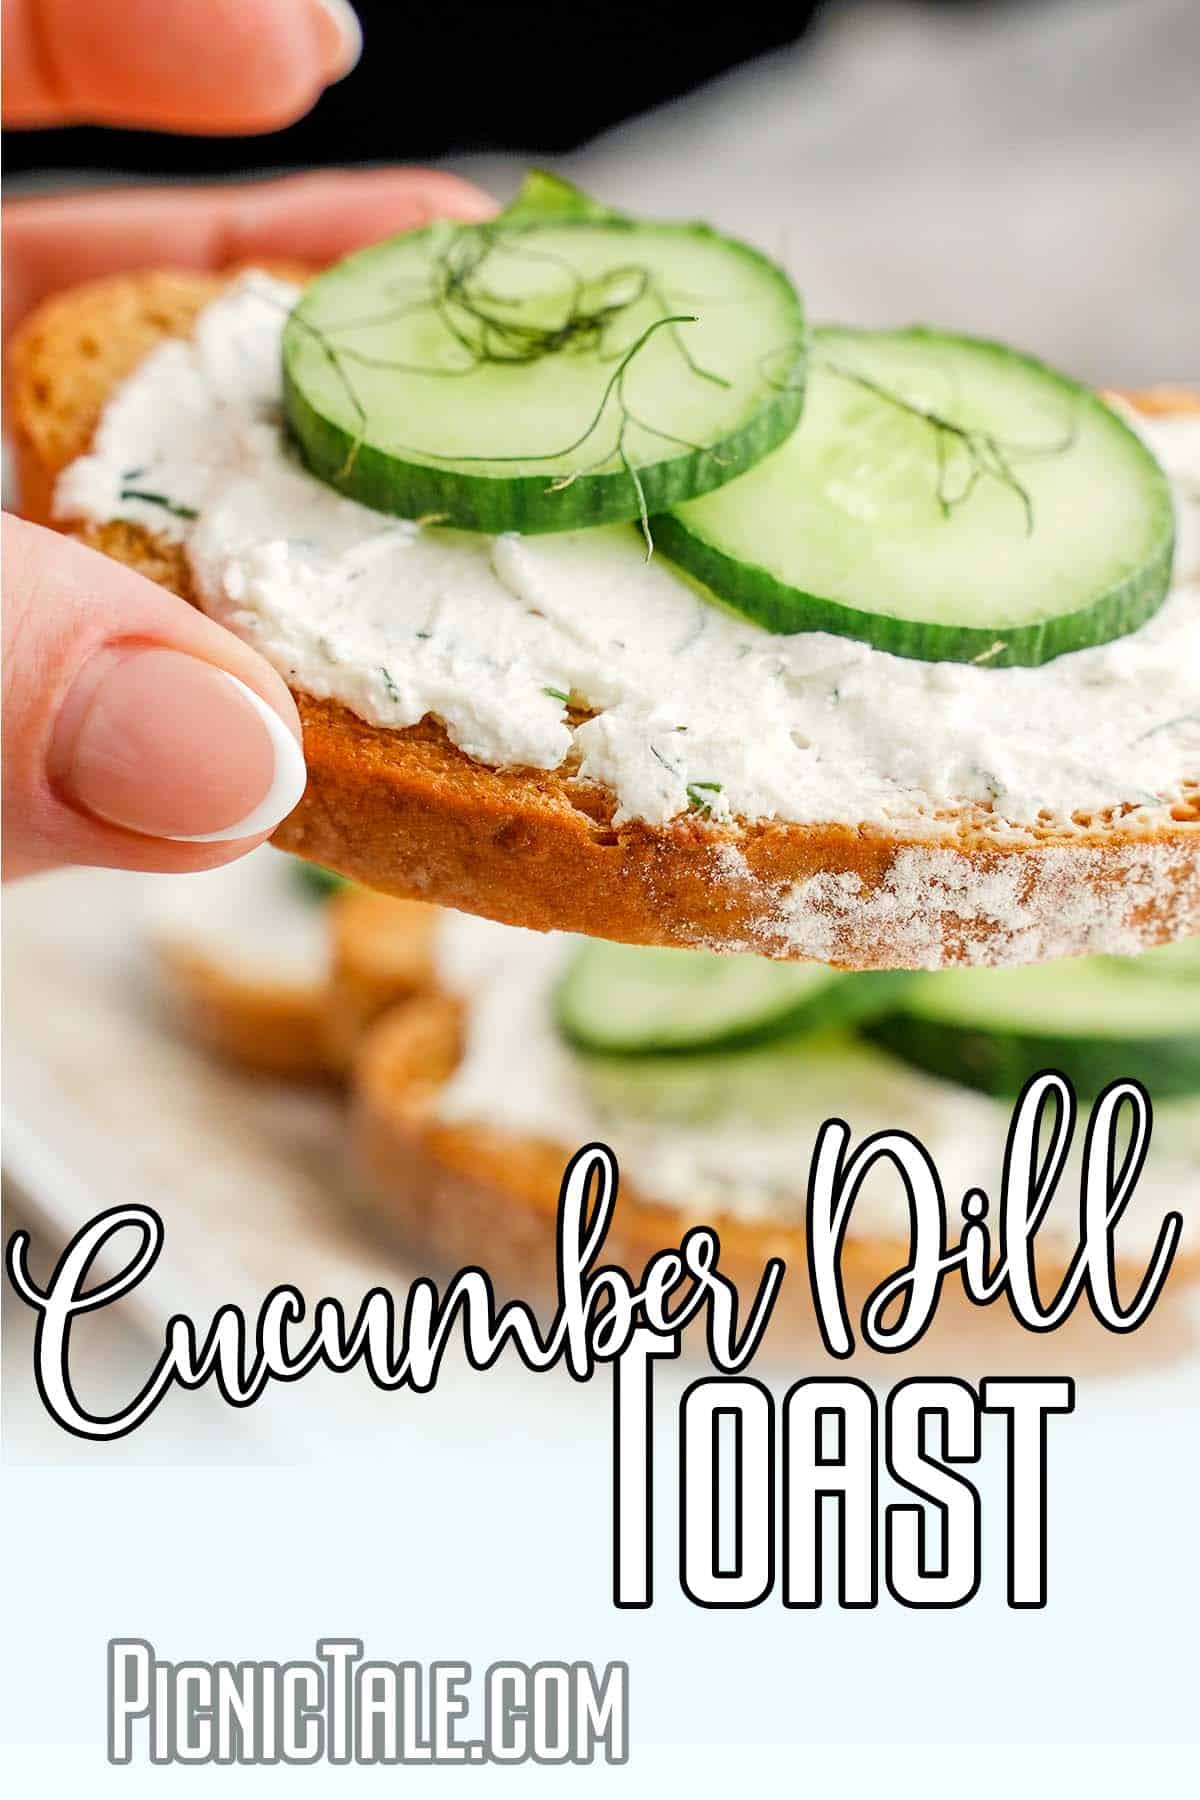 Holding in hand Cucumber Dill Toast Sandwich wording on bottom.